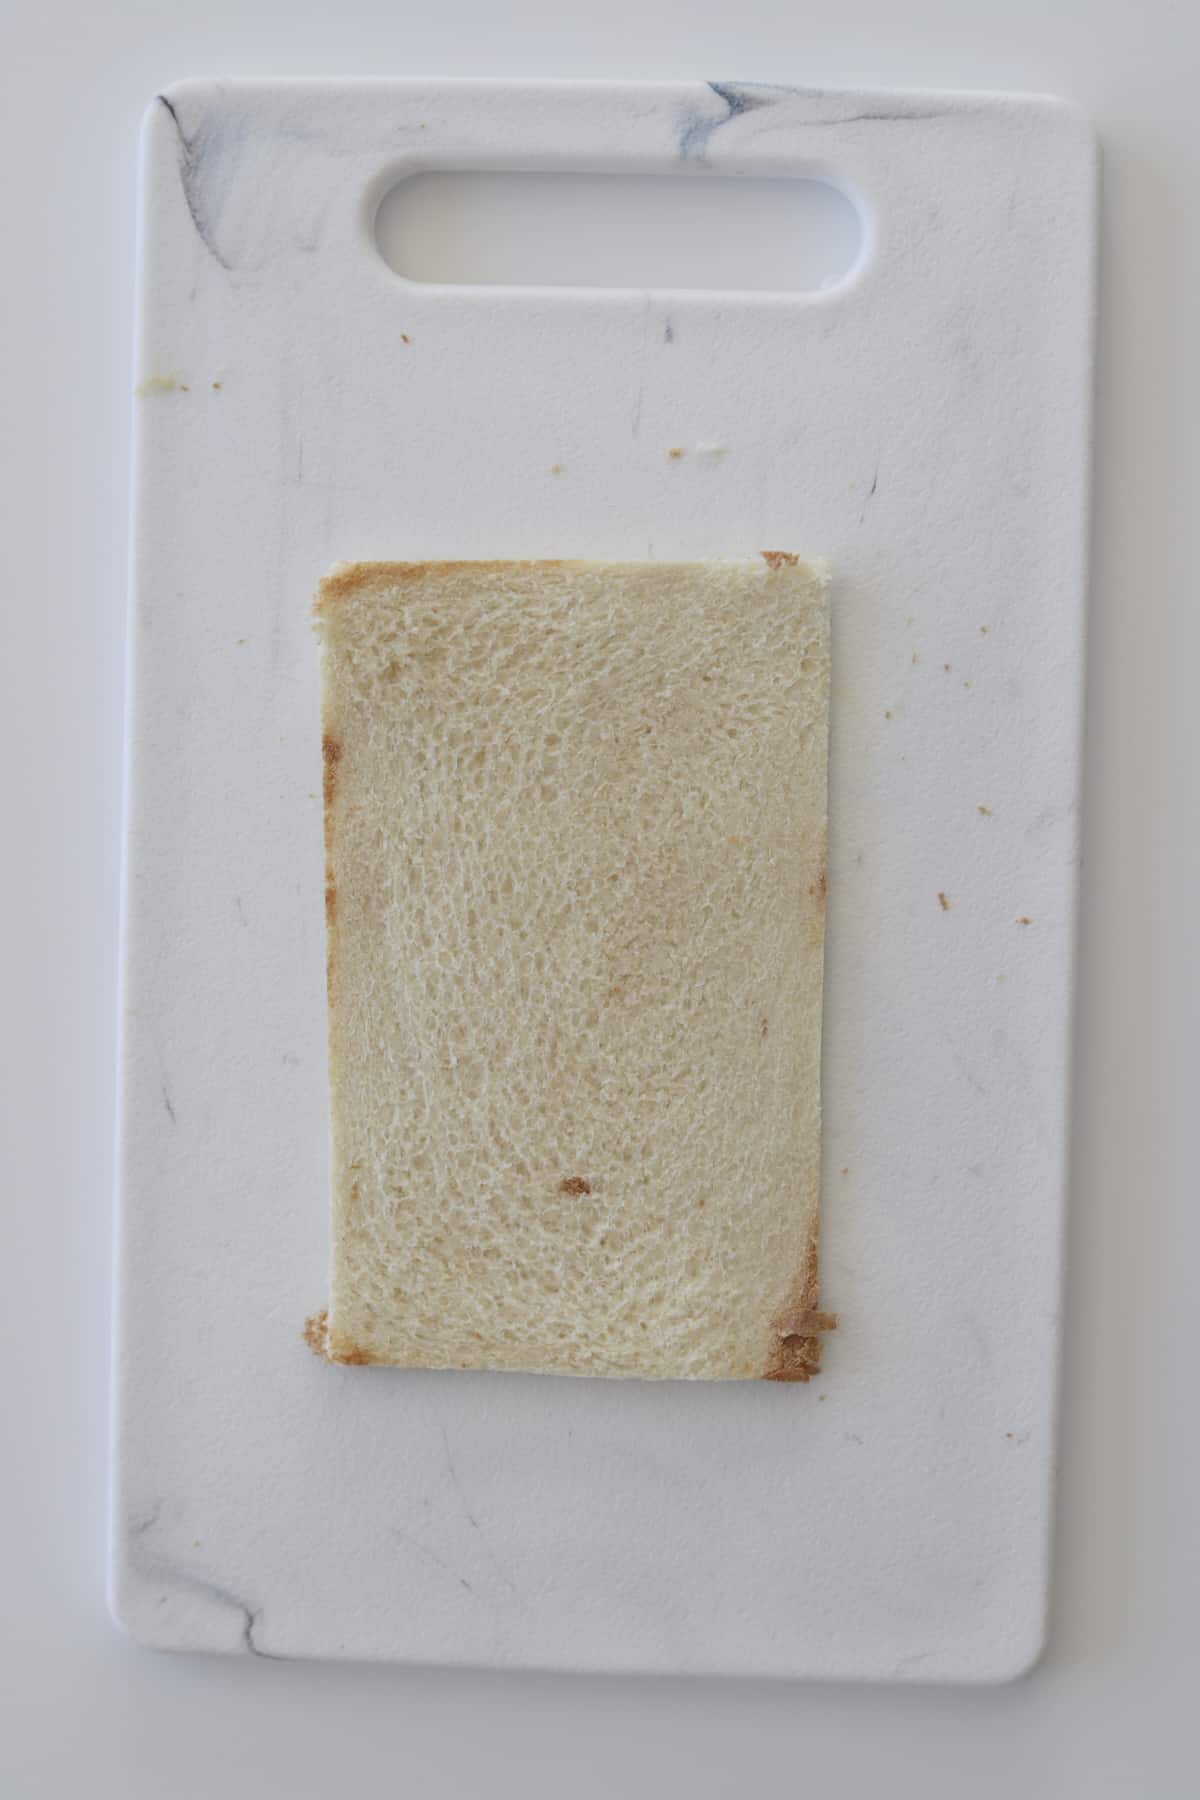 flattened bread with the crust missing